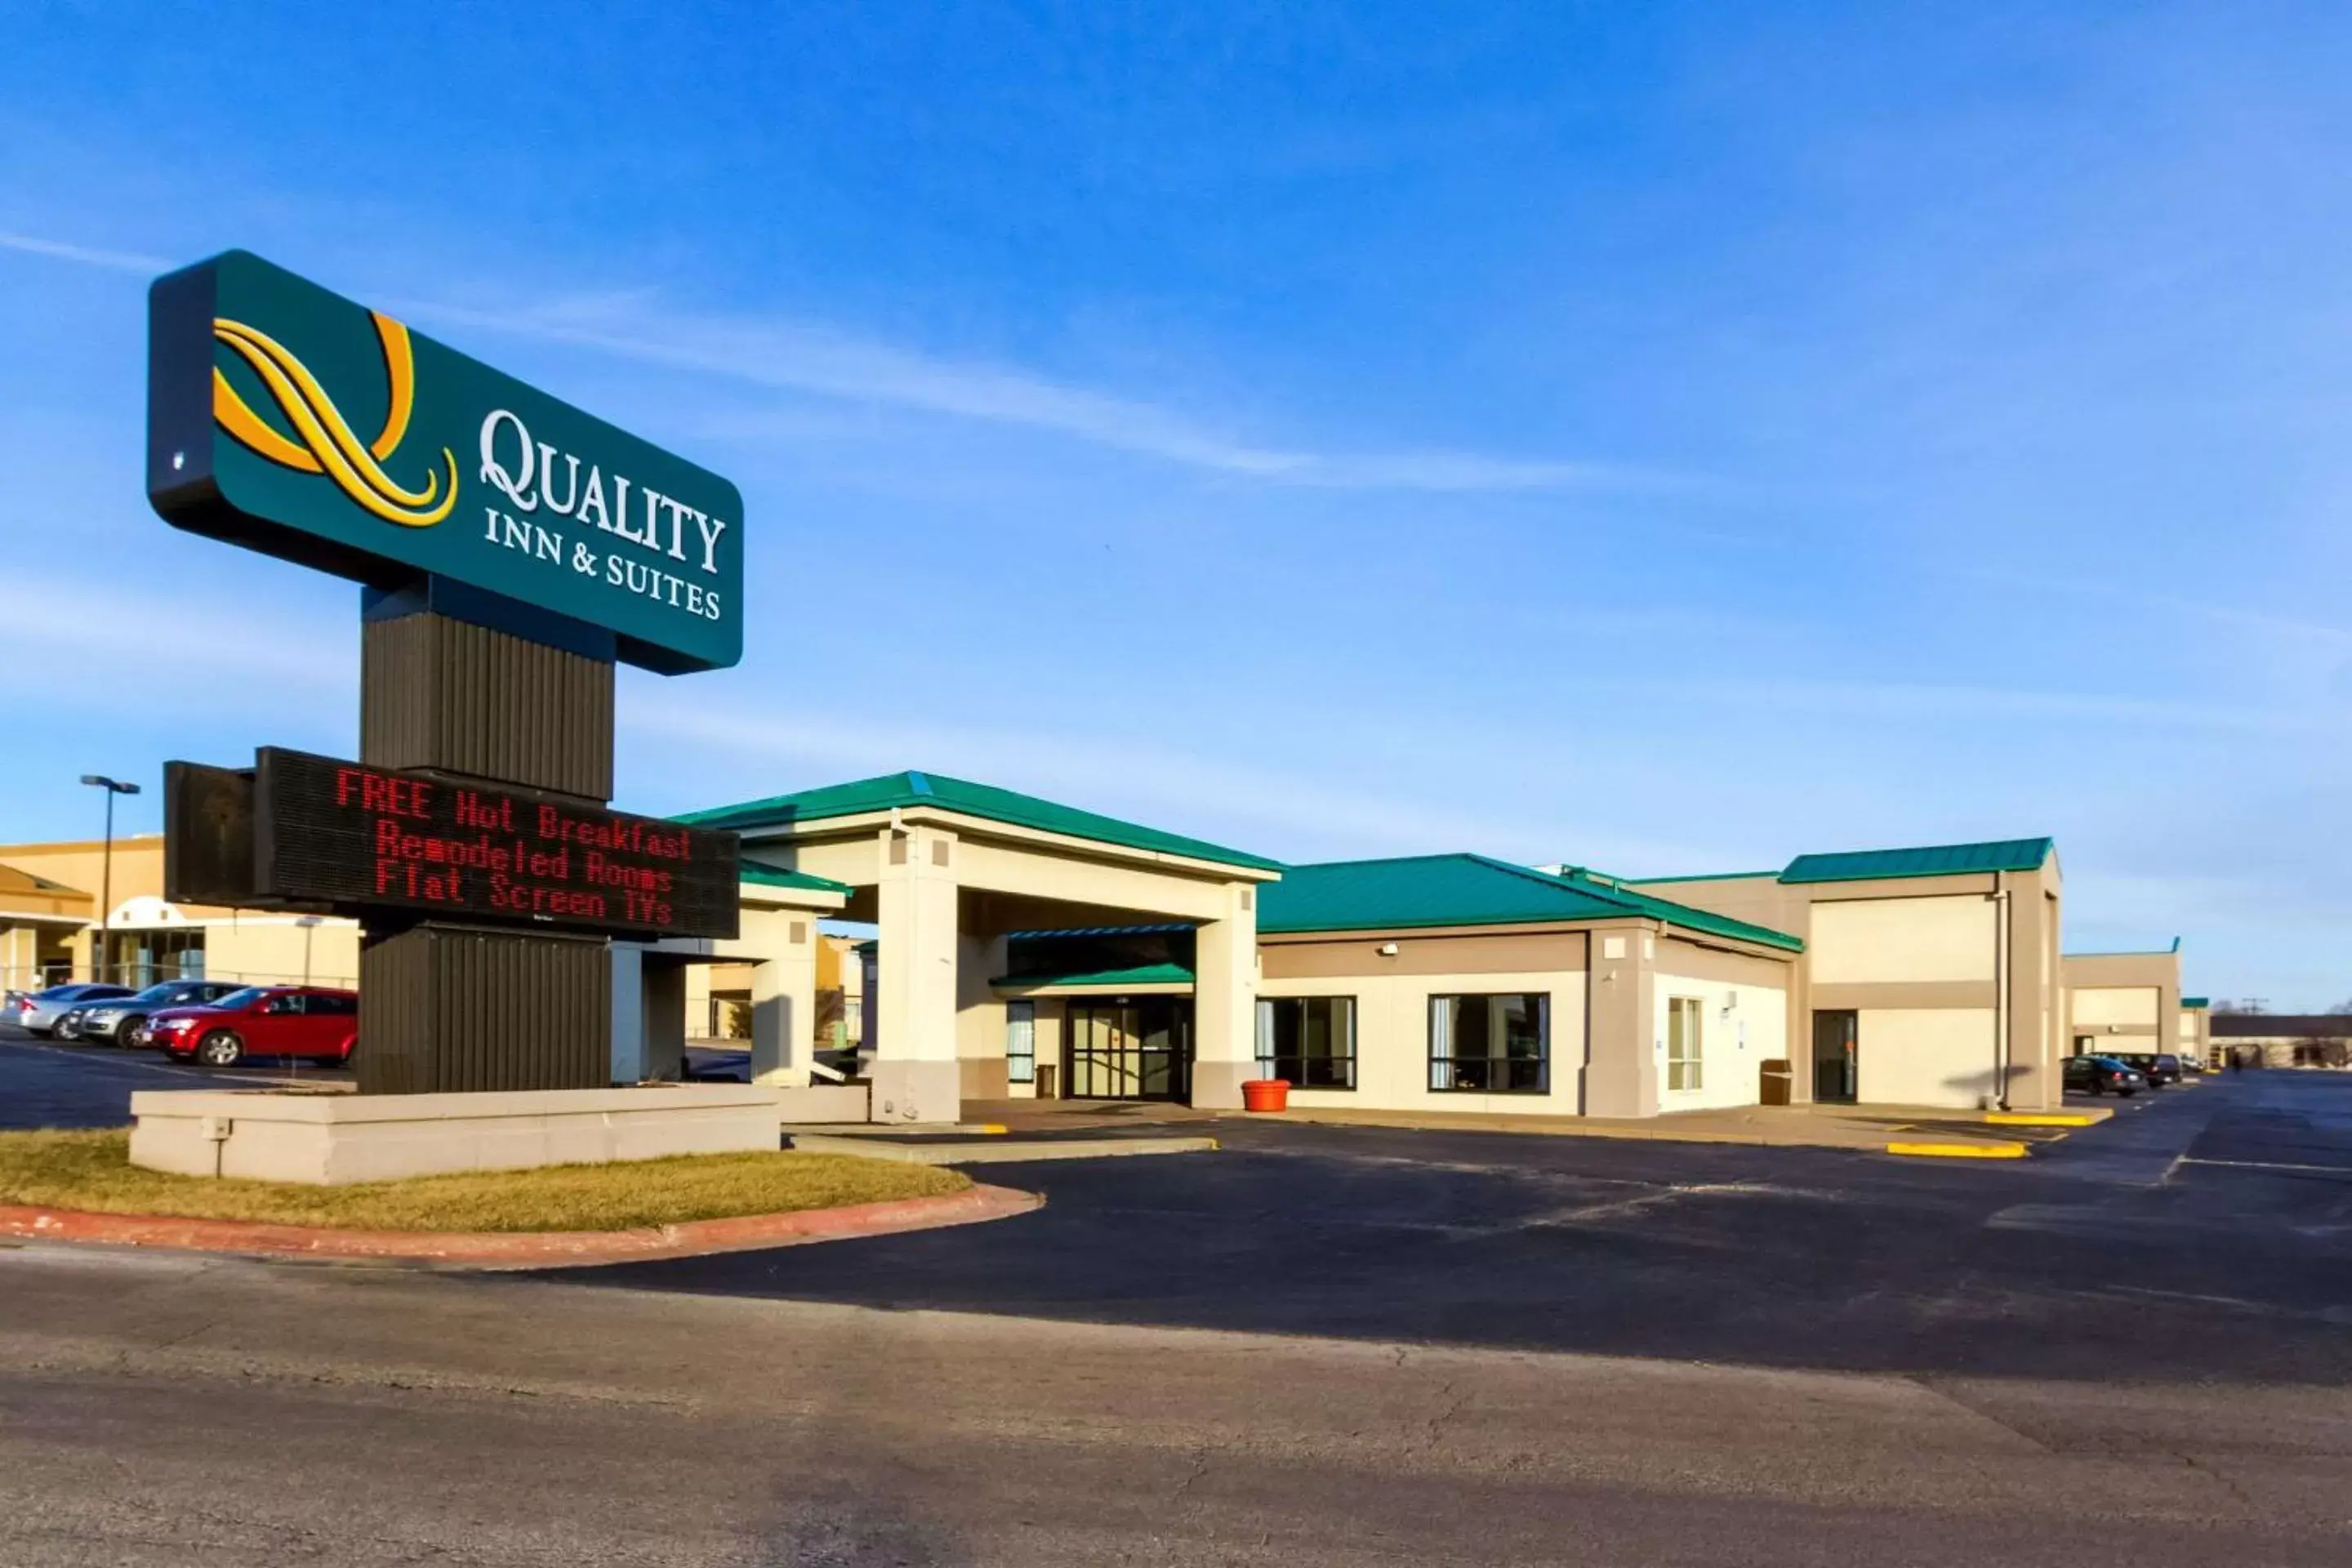 Property building in Quality Inn & Suites Moline